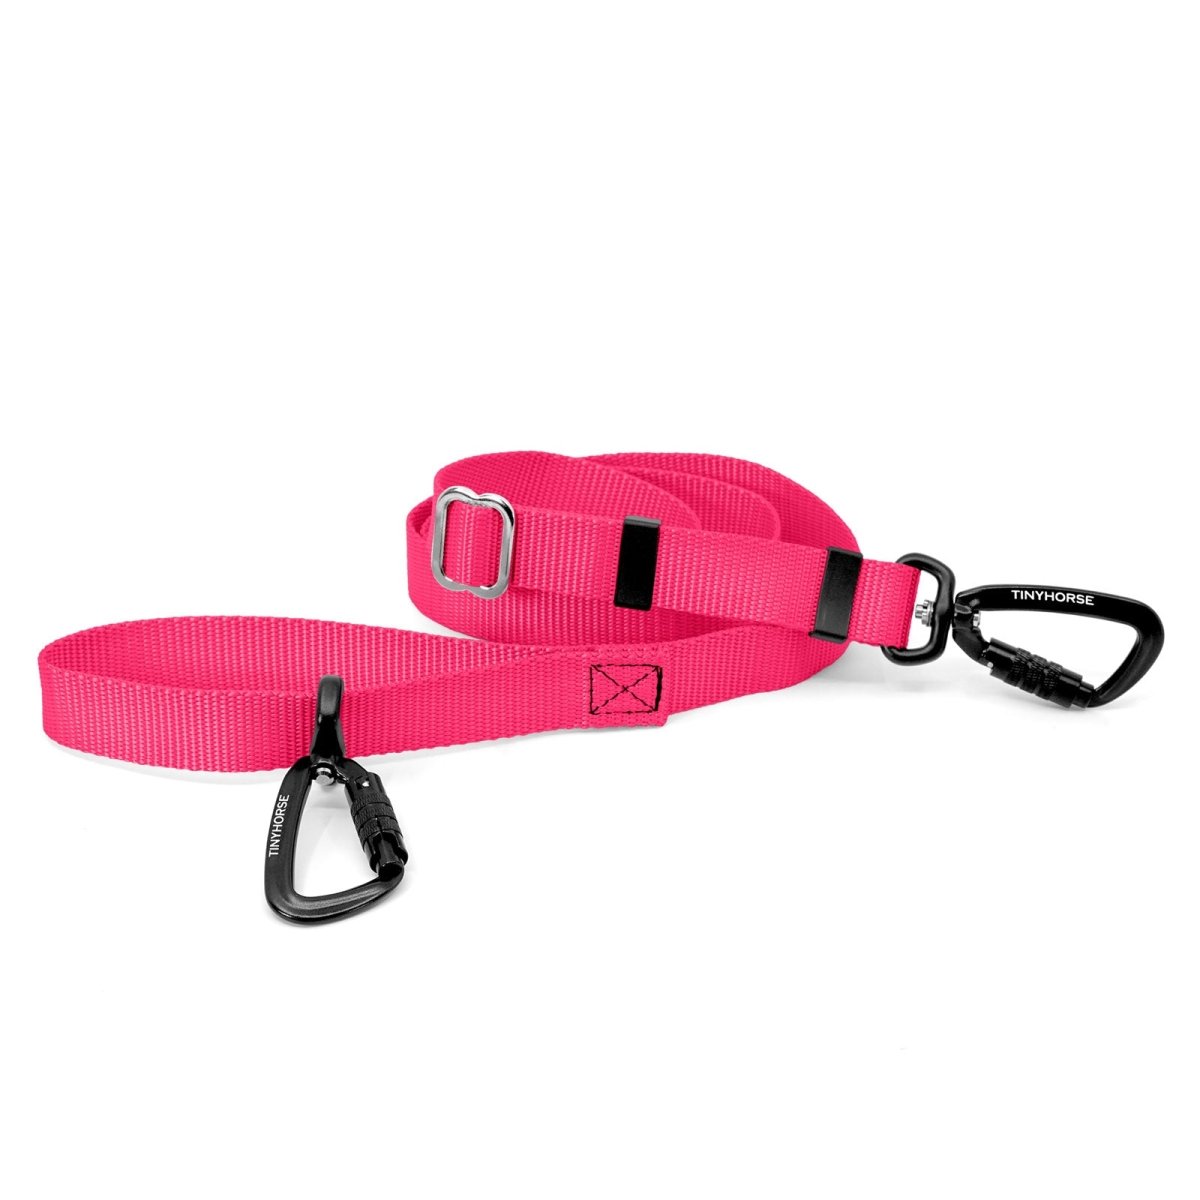 A neon pink-coloured waterproof Lead-All Lite Extra with 2 auto-locking carabiners